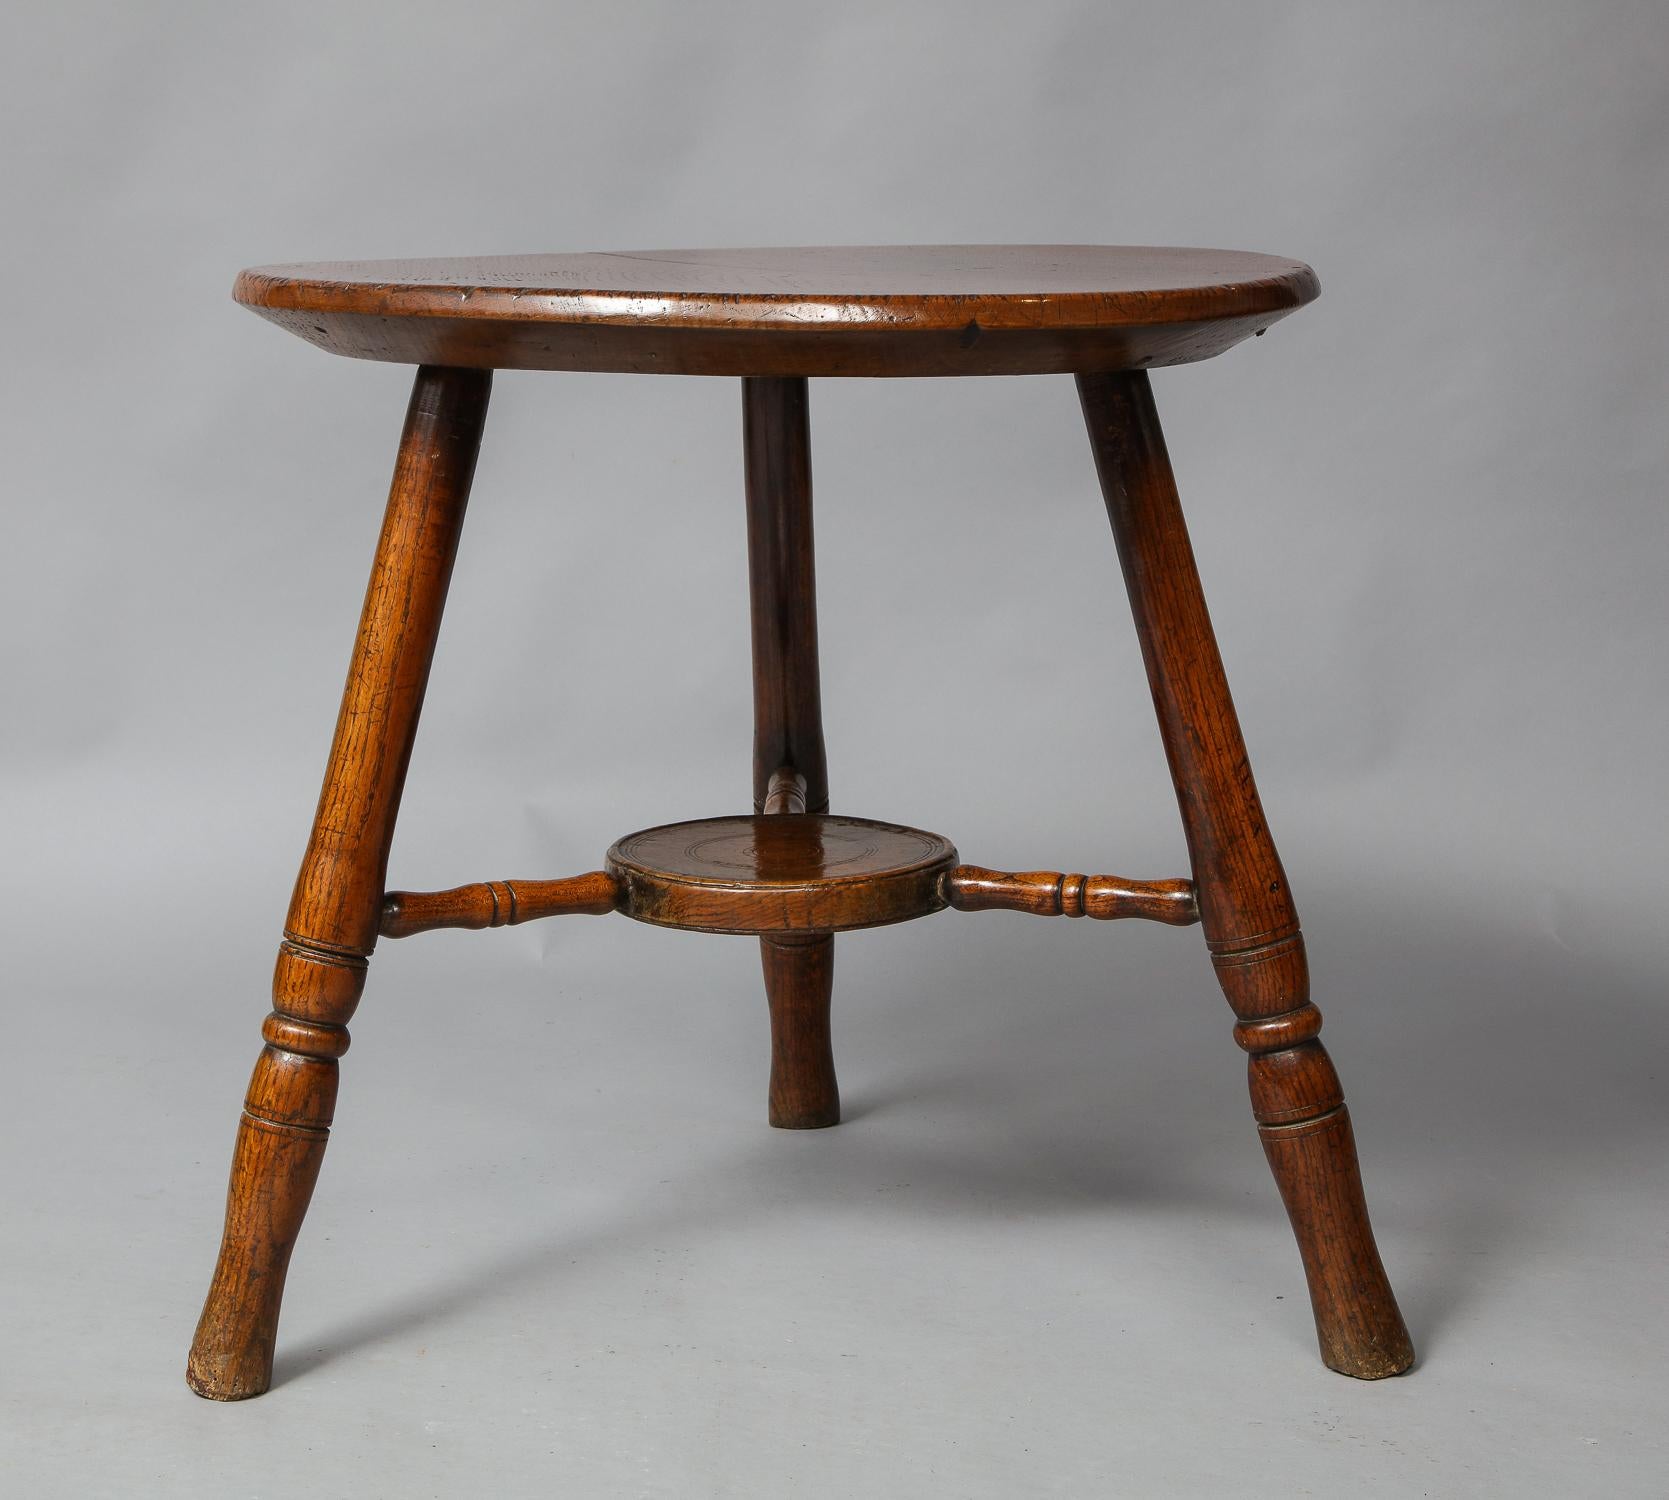 An early 19th century Welsh cheese-top cricket table featuring a thick chamfered top with great color and patina, and an unusual incised roundel undertier jointed by three turned stretchers, on well turned splayed legs. A sculptural and balanced